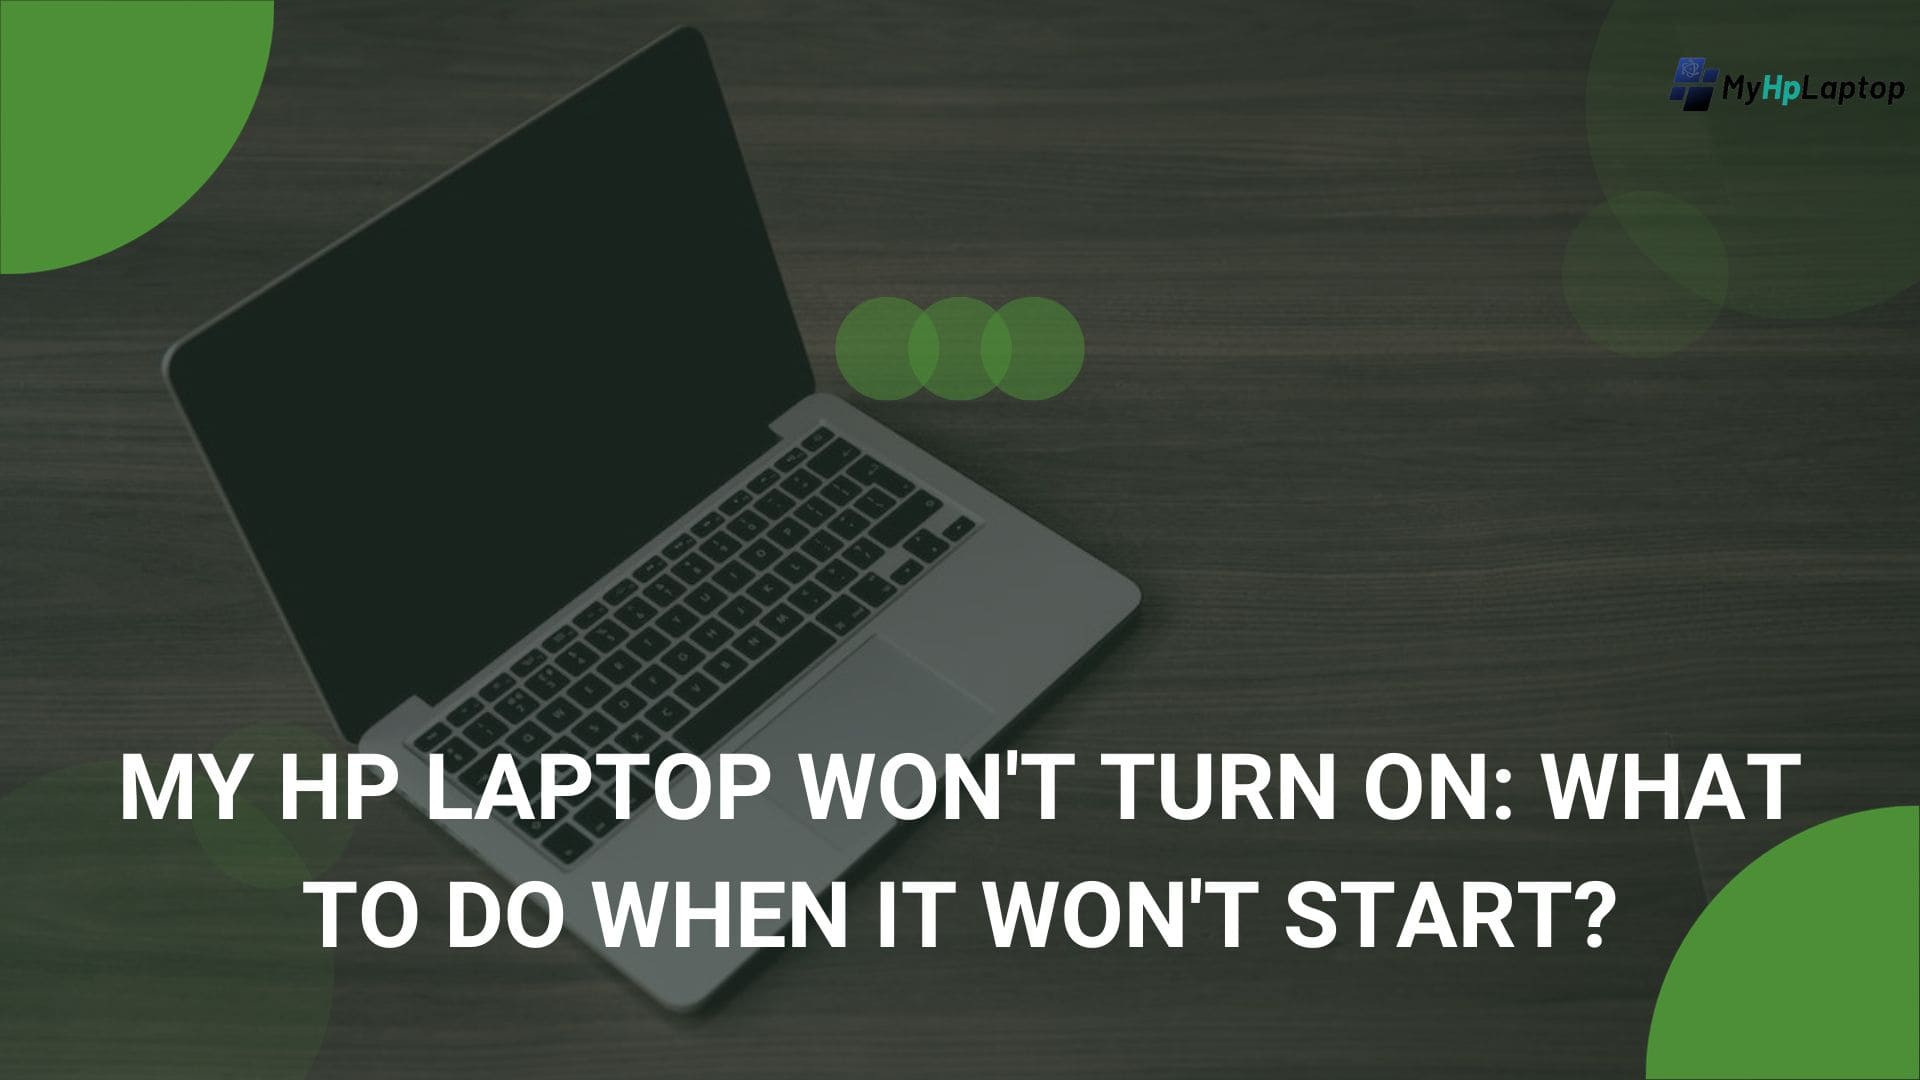 My HP Laptop Won't Turn On: What to Do When It Won't Start?